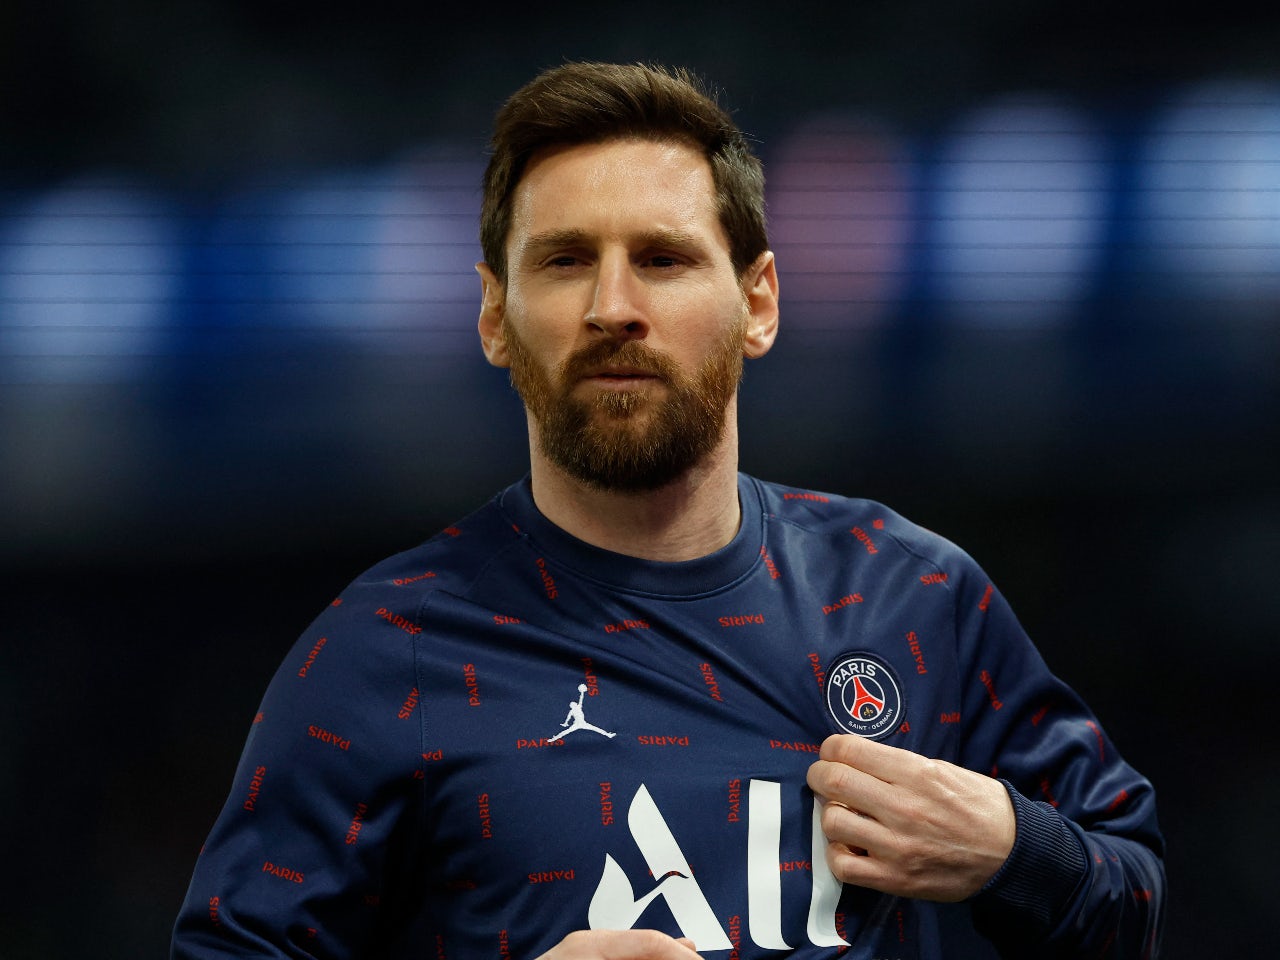 PSG forward Lionel Messi: 'I will reassess future after World Cup' - Sports Mole